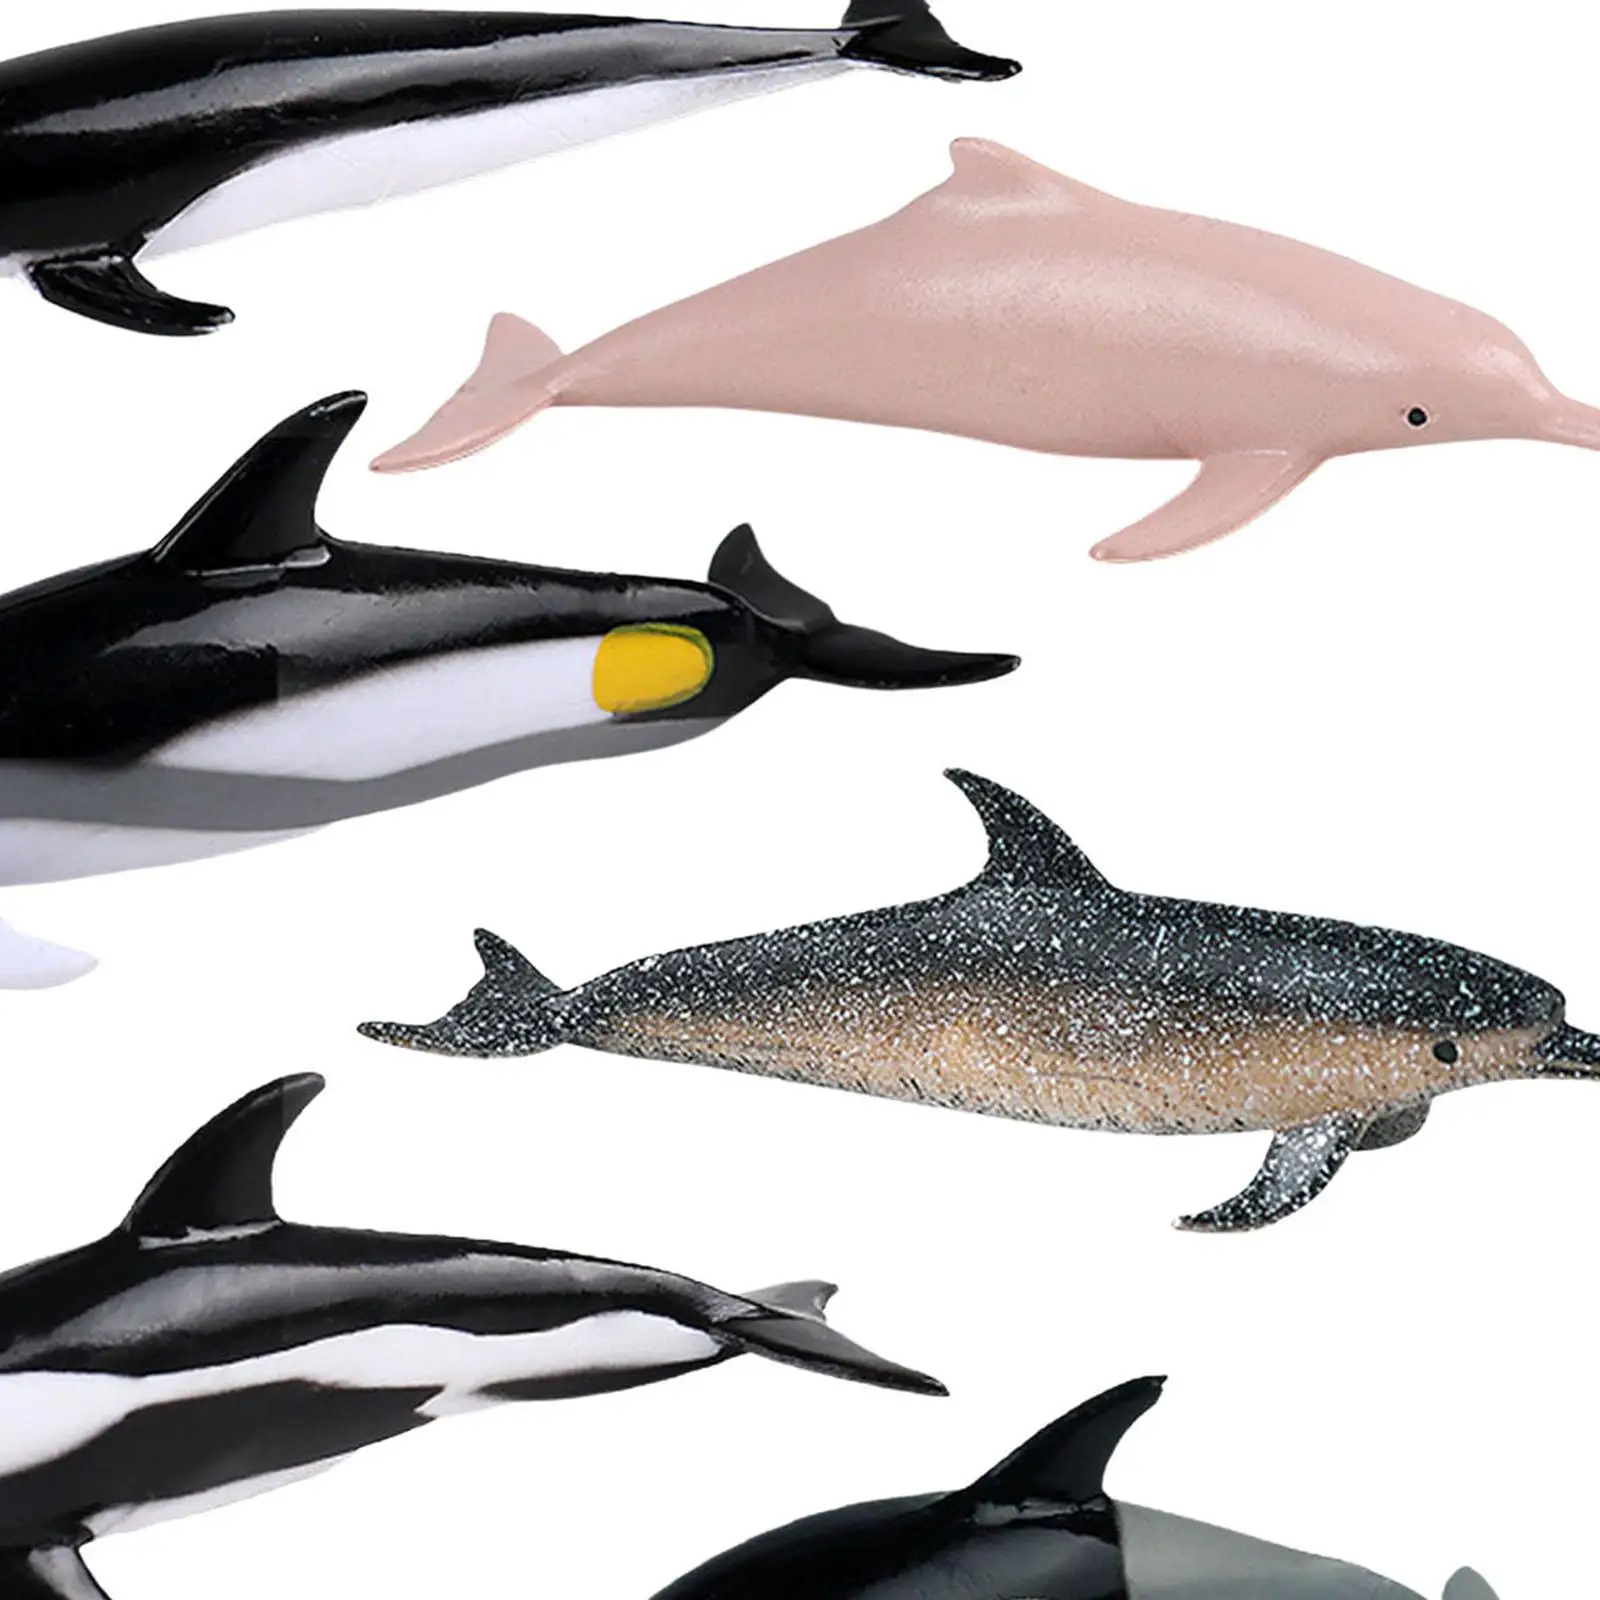 6Pcs Mini Dolphin Figurines Model,Realistic Detailed Action Figures for Toddlers